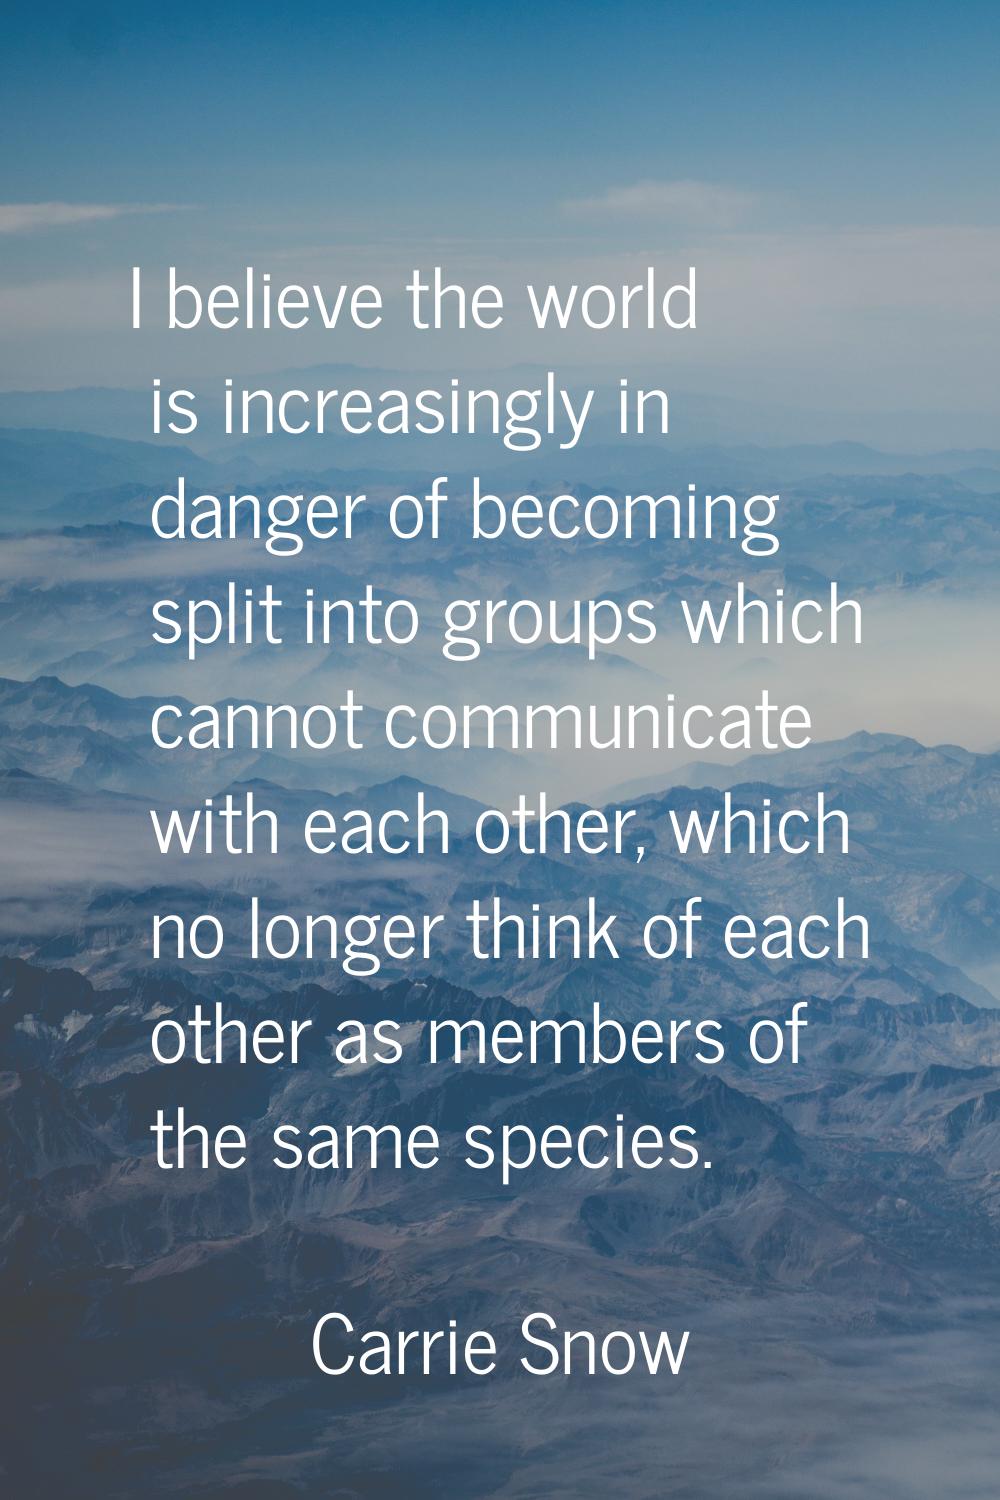 I believe the world is increasingly in danger of becoming split into groups which cannot communicat